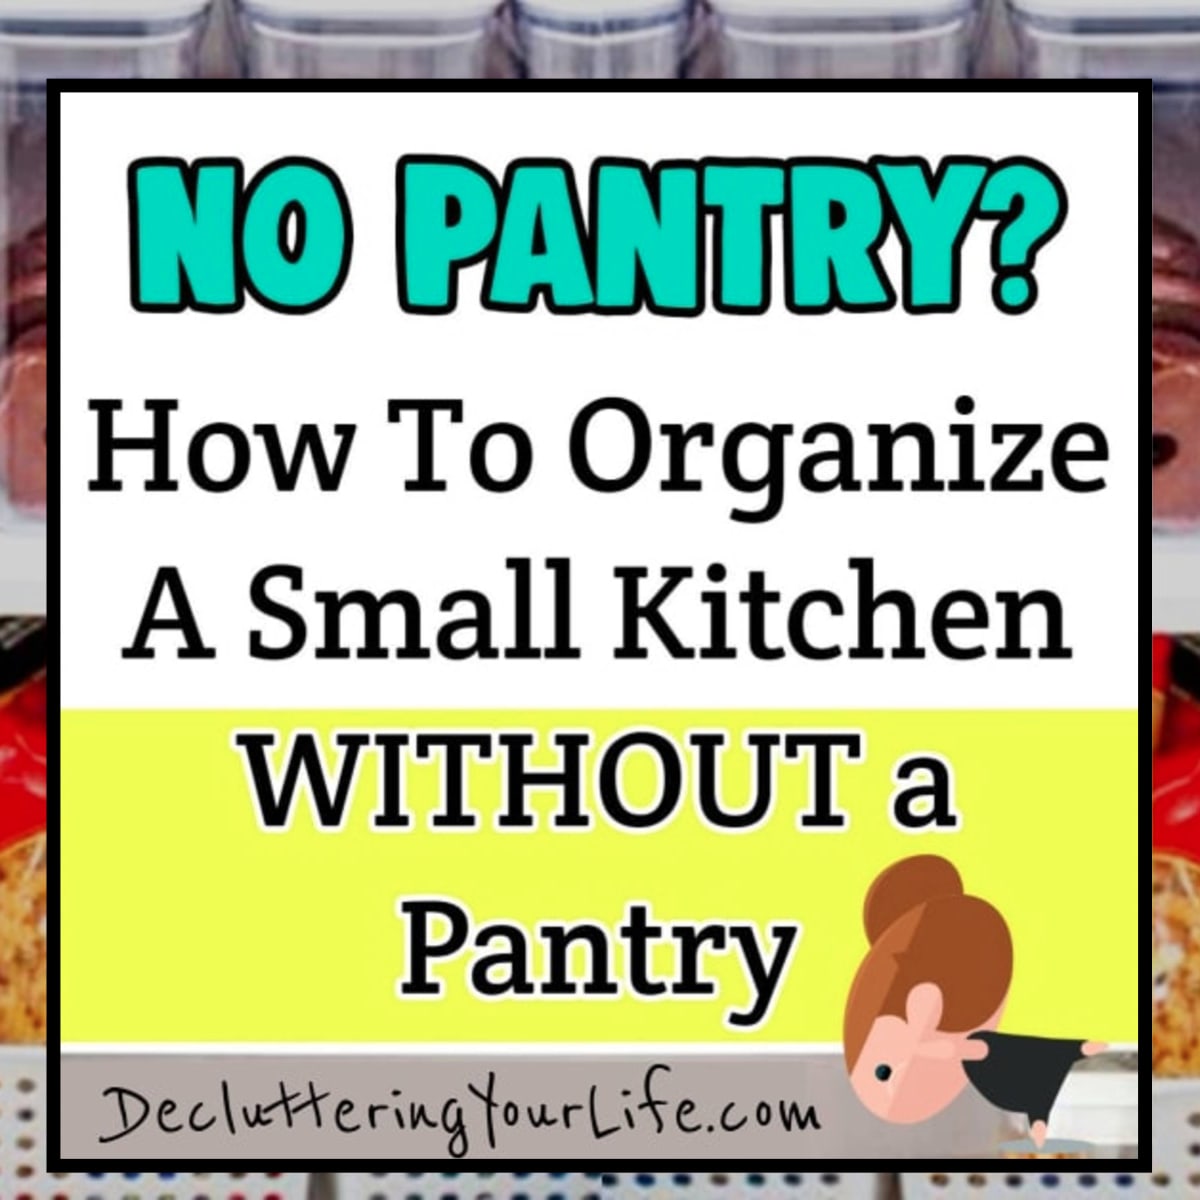 No Pantry SOLUTIONS - How to organize a small kitchen WITHOUT a pantry.Pantry Alternatives for small kitchens and apartment kitchens with NO pantry - simple DIY solutions for creating a pantry and organizing your kitchen with no pantry storage space with a pantry substitute